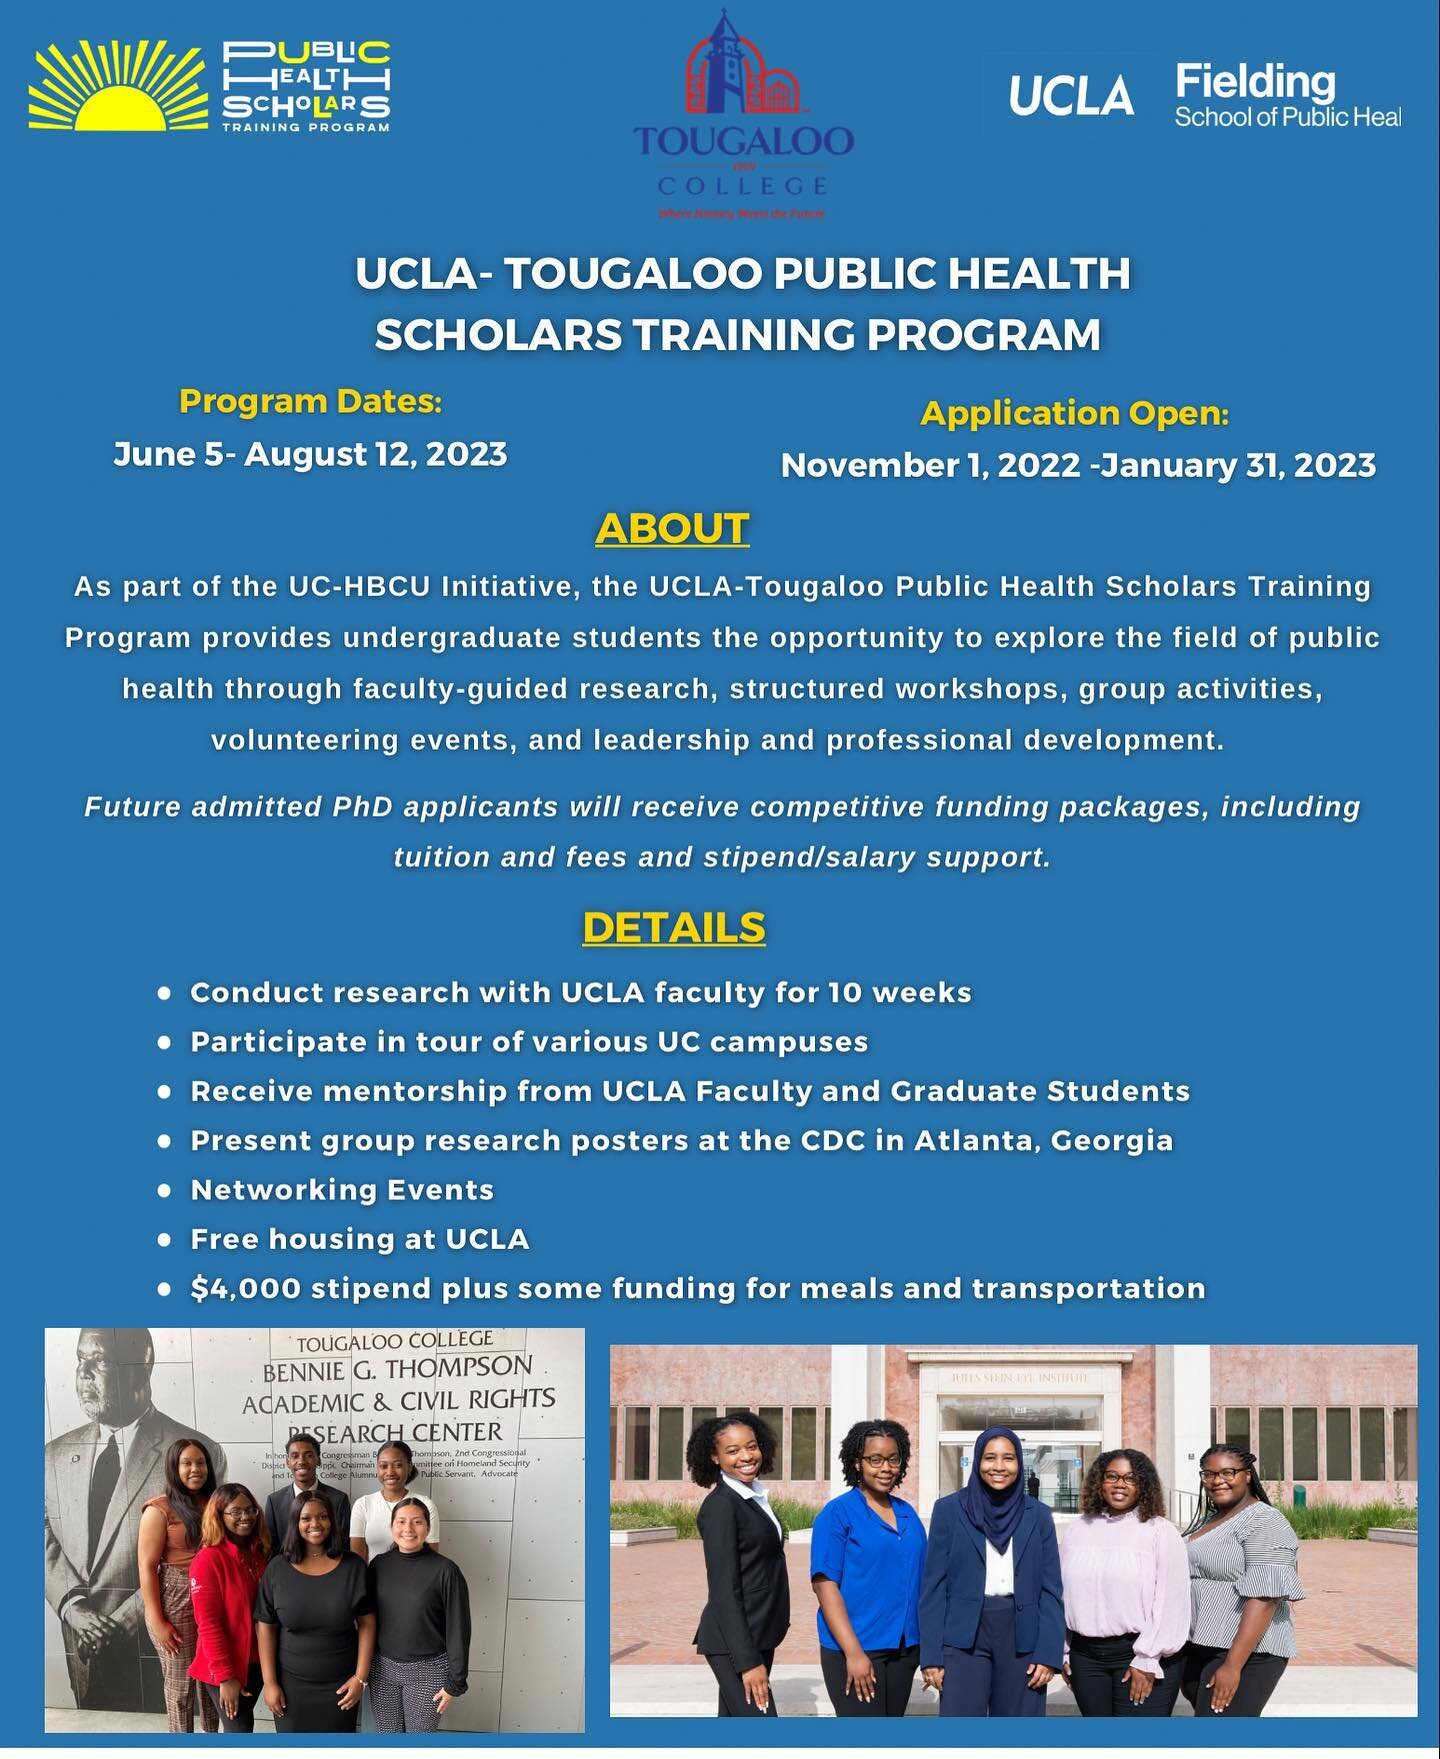 We are coming to Tougaloo College!

Join us Wednesday, November 9th at the Bennie G Thompson Auditorium from 5-8 pm to learn more about UCLA-Tougaloo Program! You will have the opportunity to meet the UCLA Program Team, a Doctoral Student from the UC